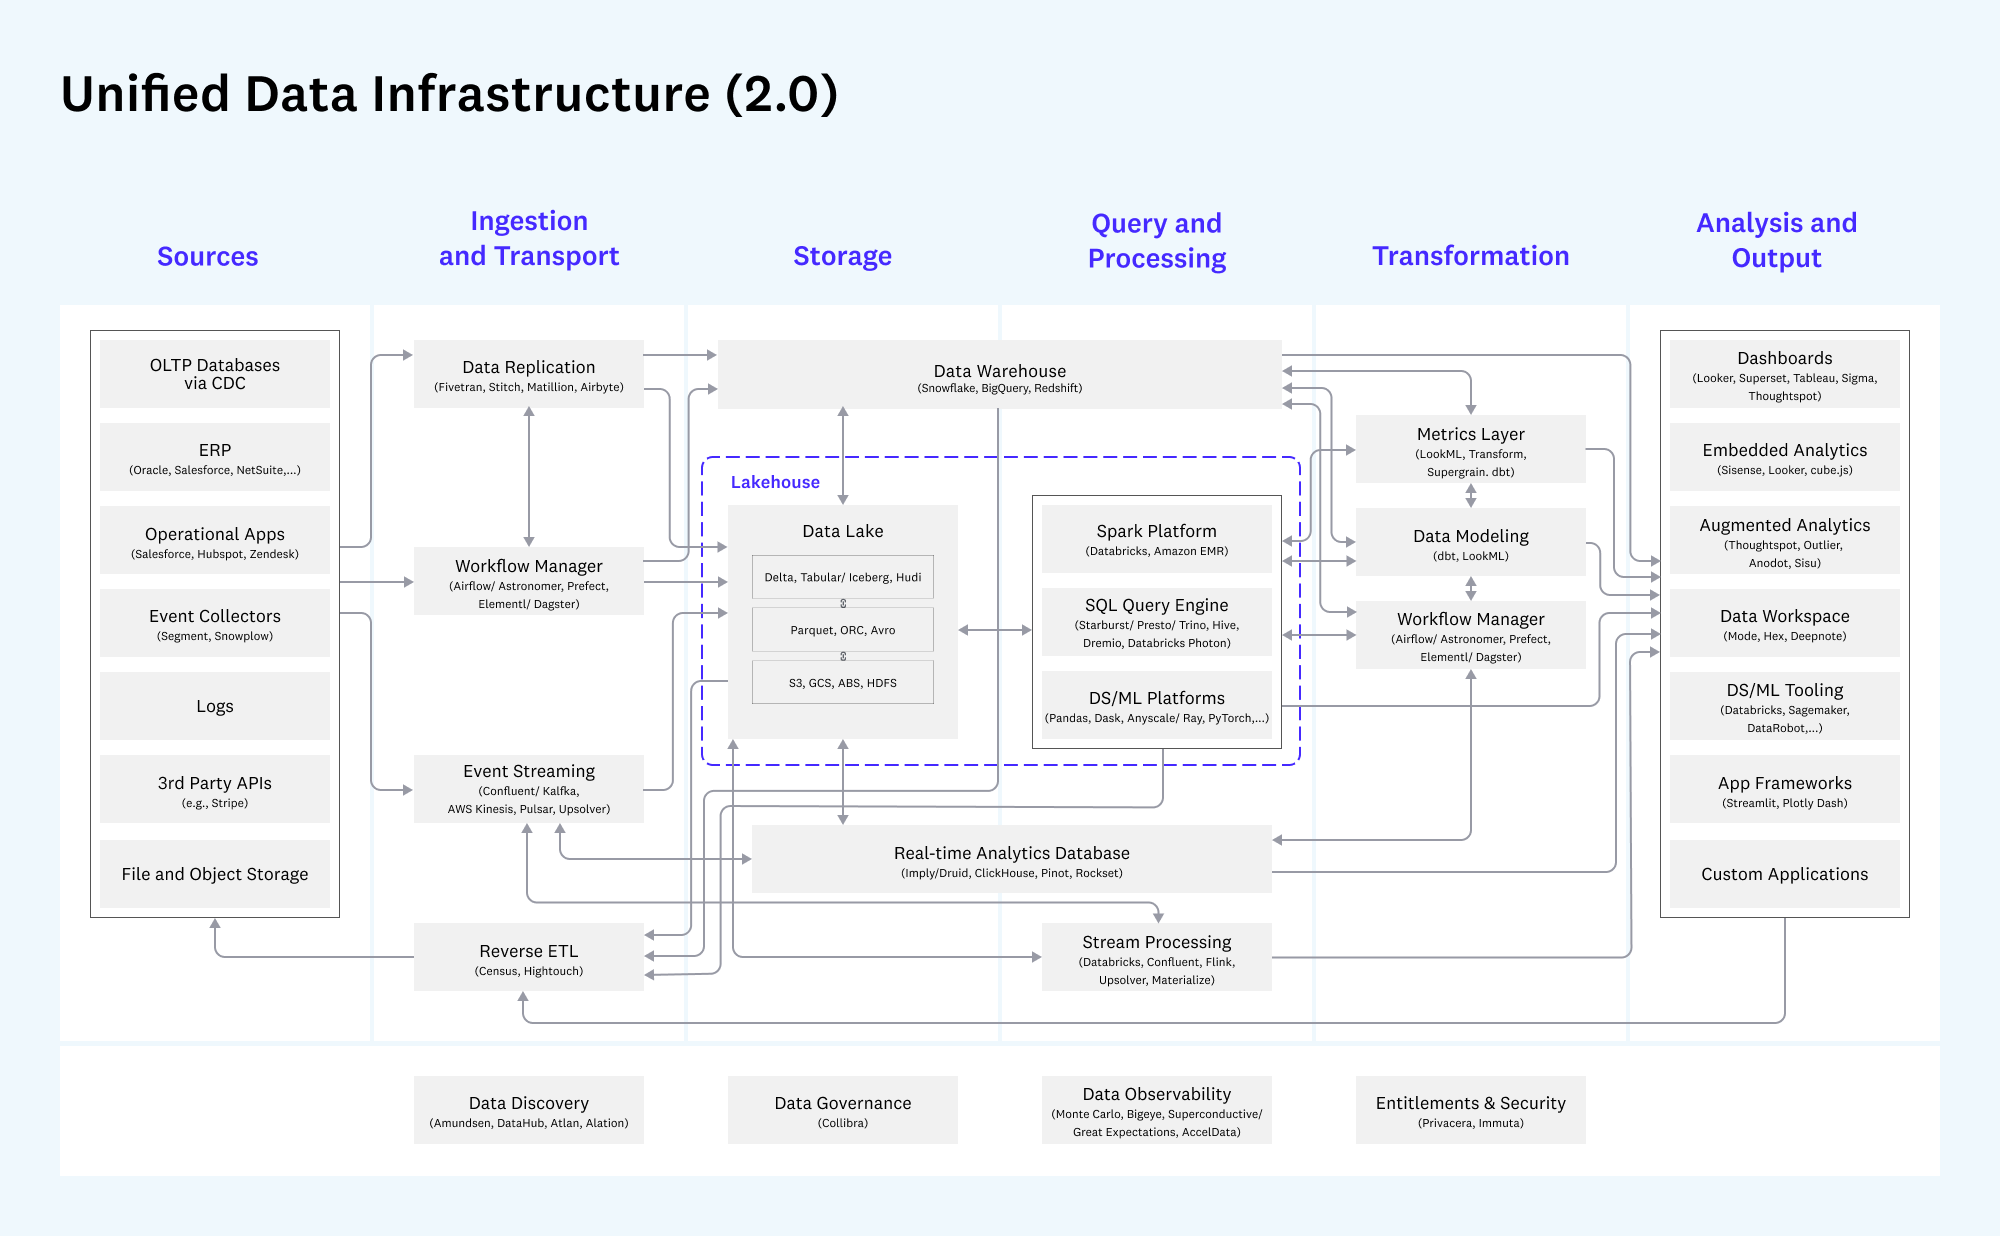 Unified view of infrastrure and tools in the modern data stack. Source: future.com, a16z